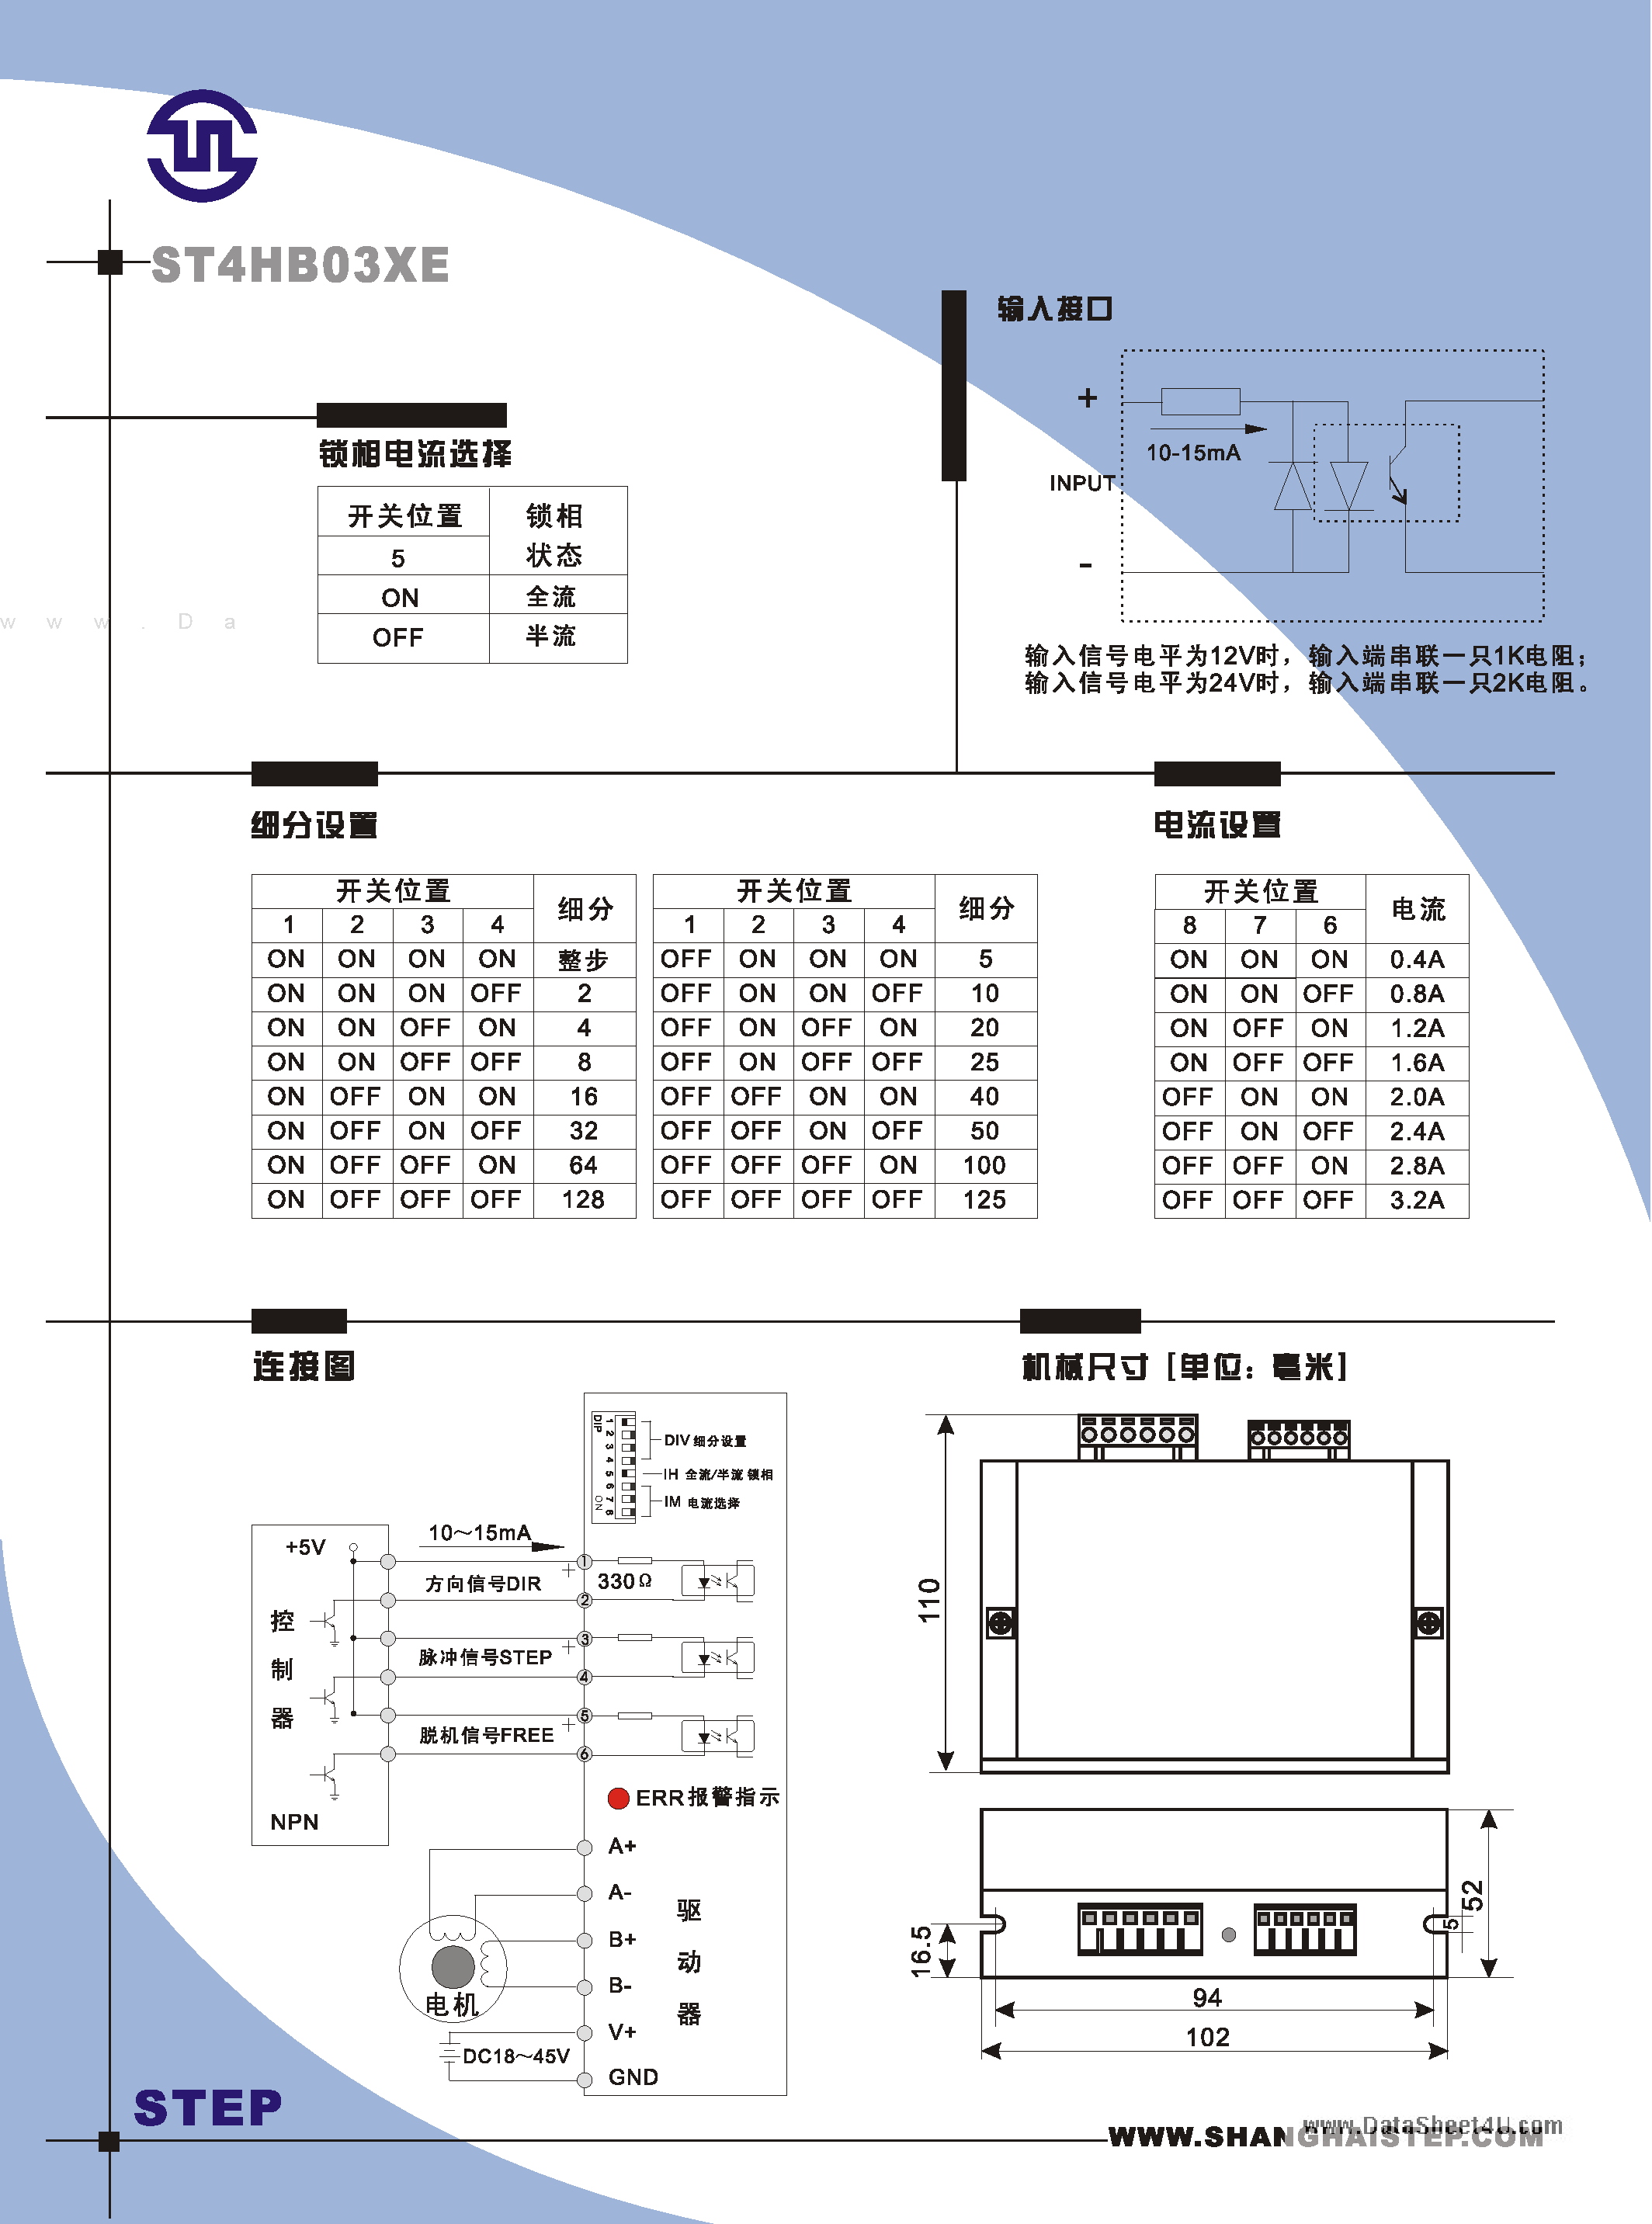 Datasheet ST4HB03XE - ST4HB03XE page 2